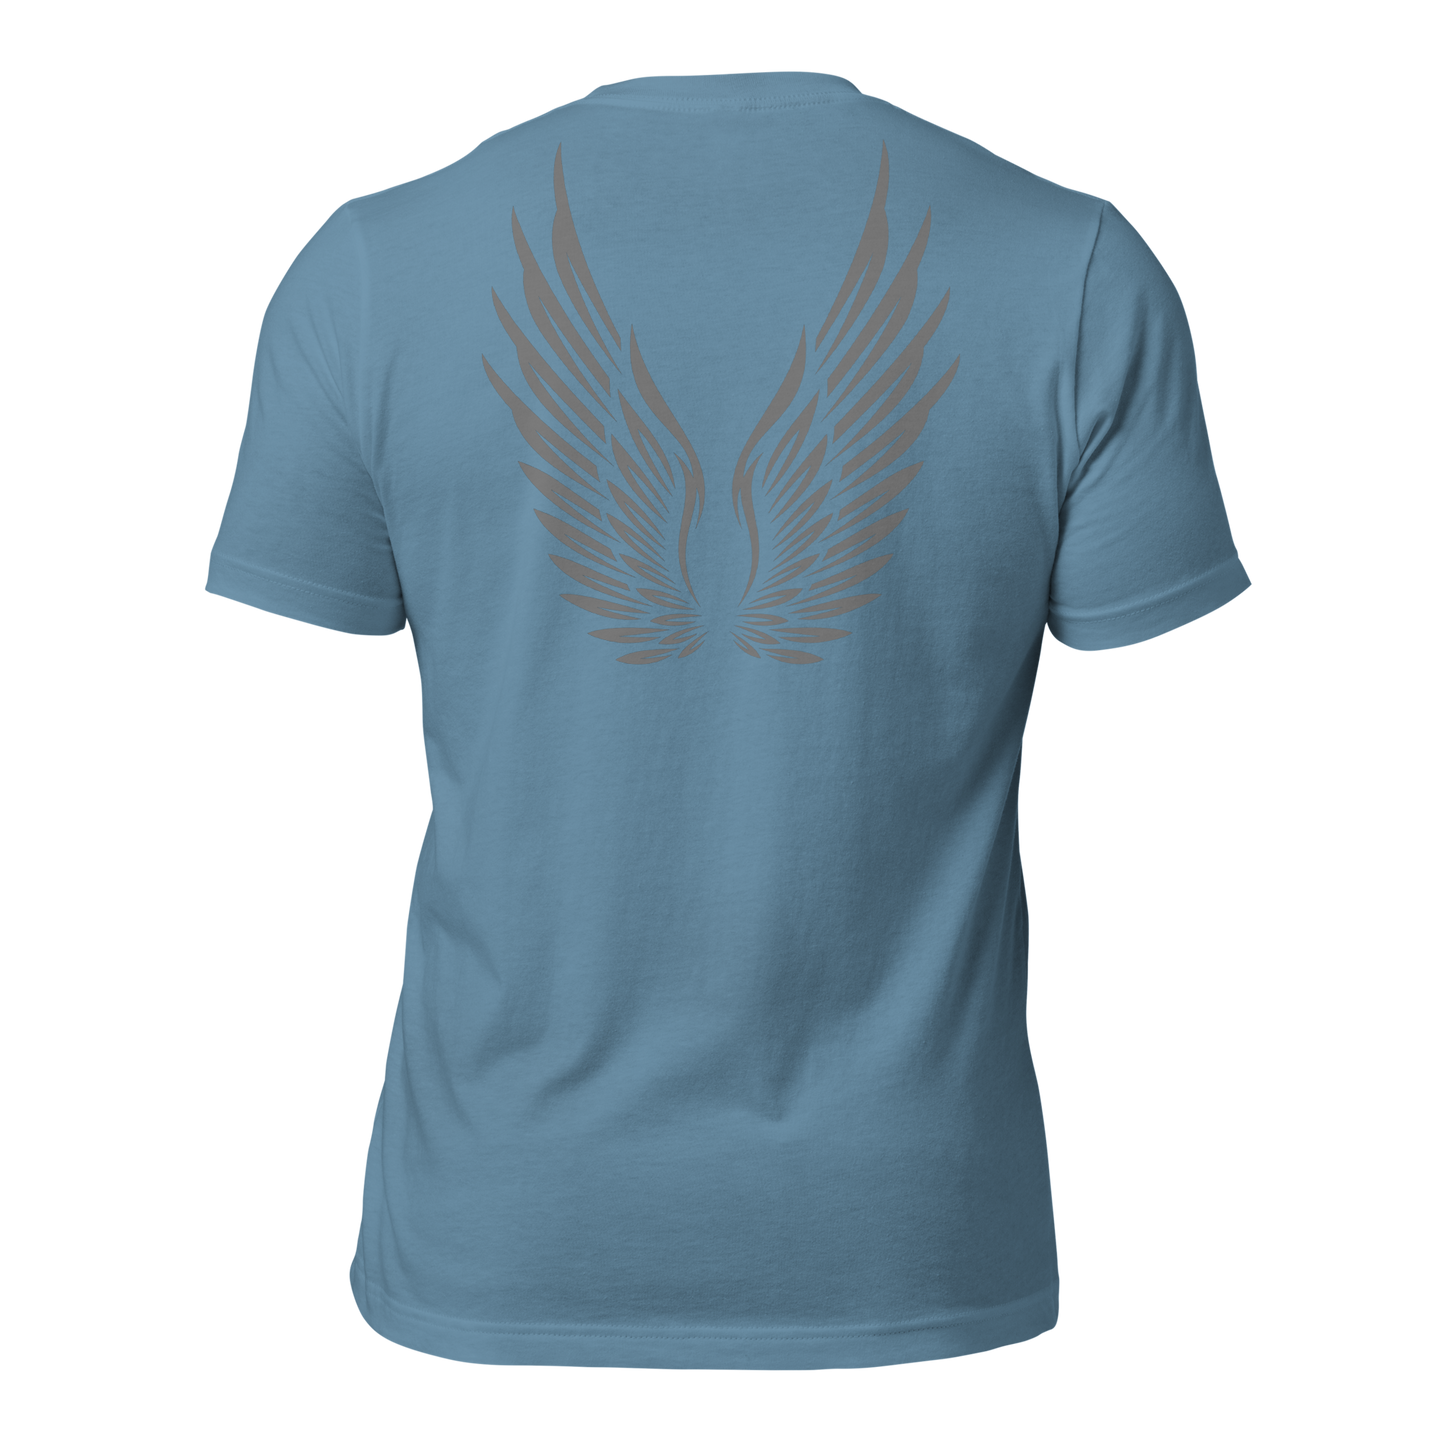 ADULT T-Shirt - RISE OF UMMAH (Large Back Wings) - Silver/White